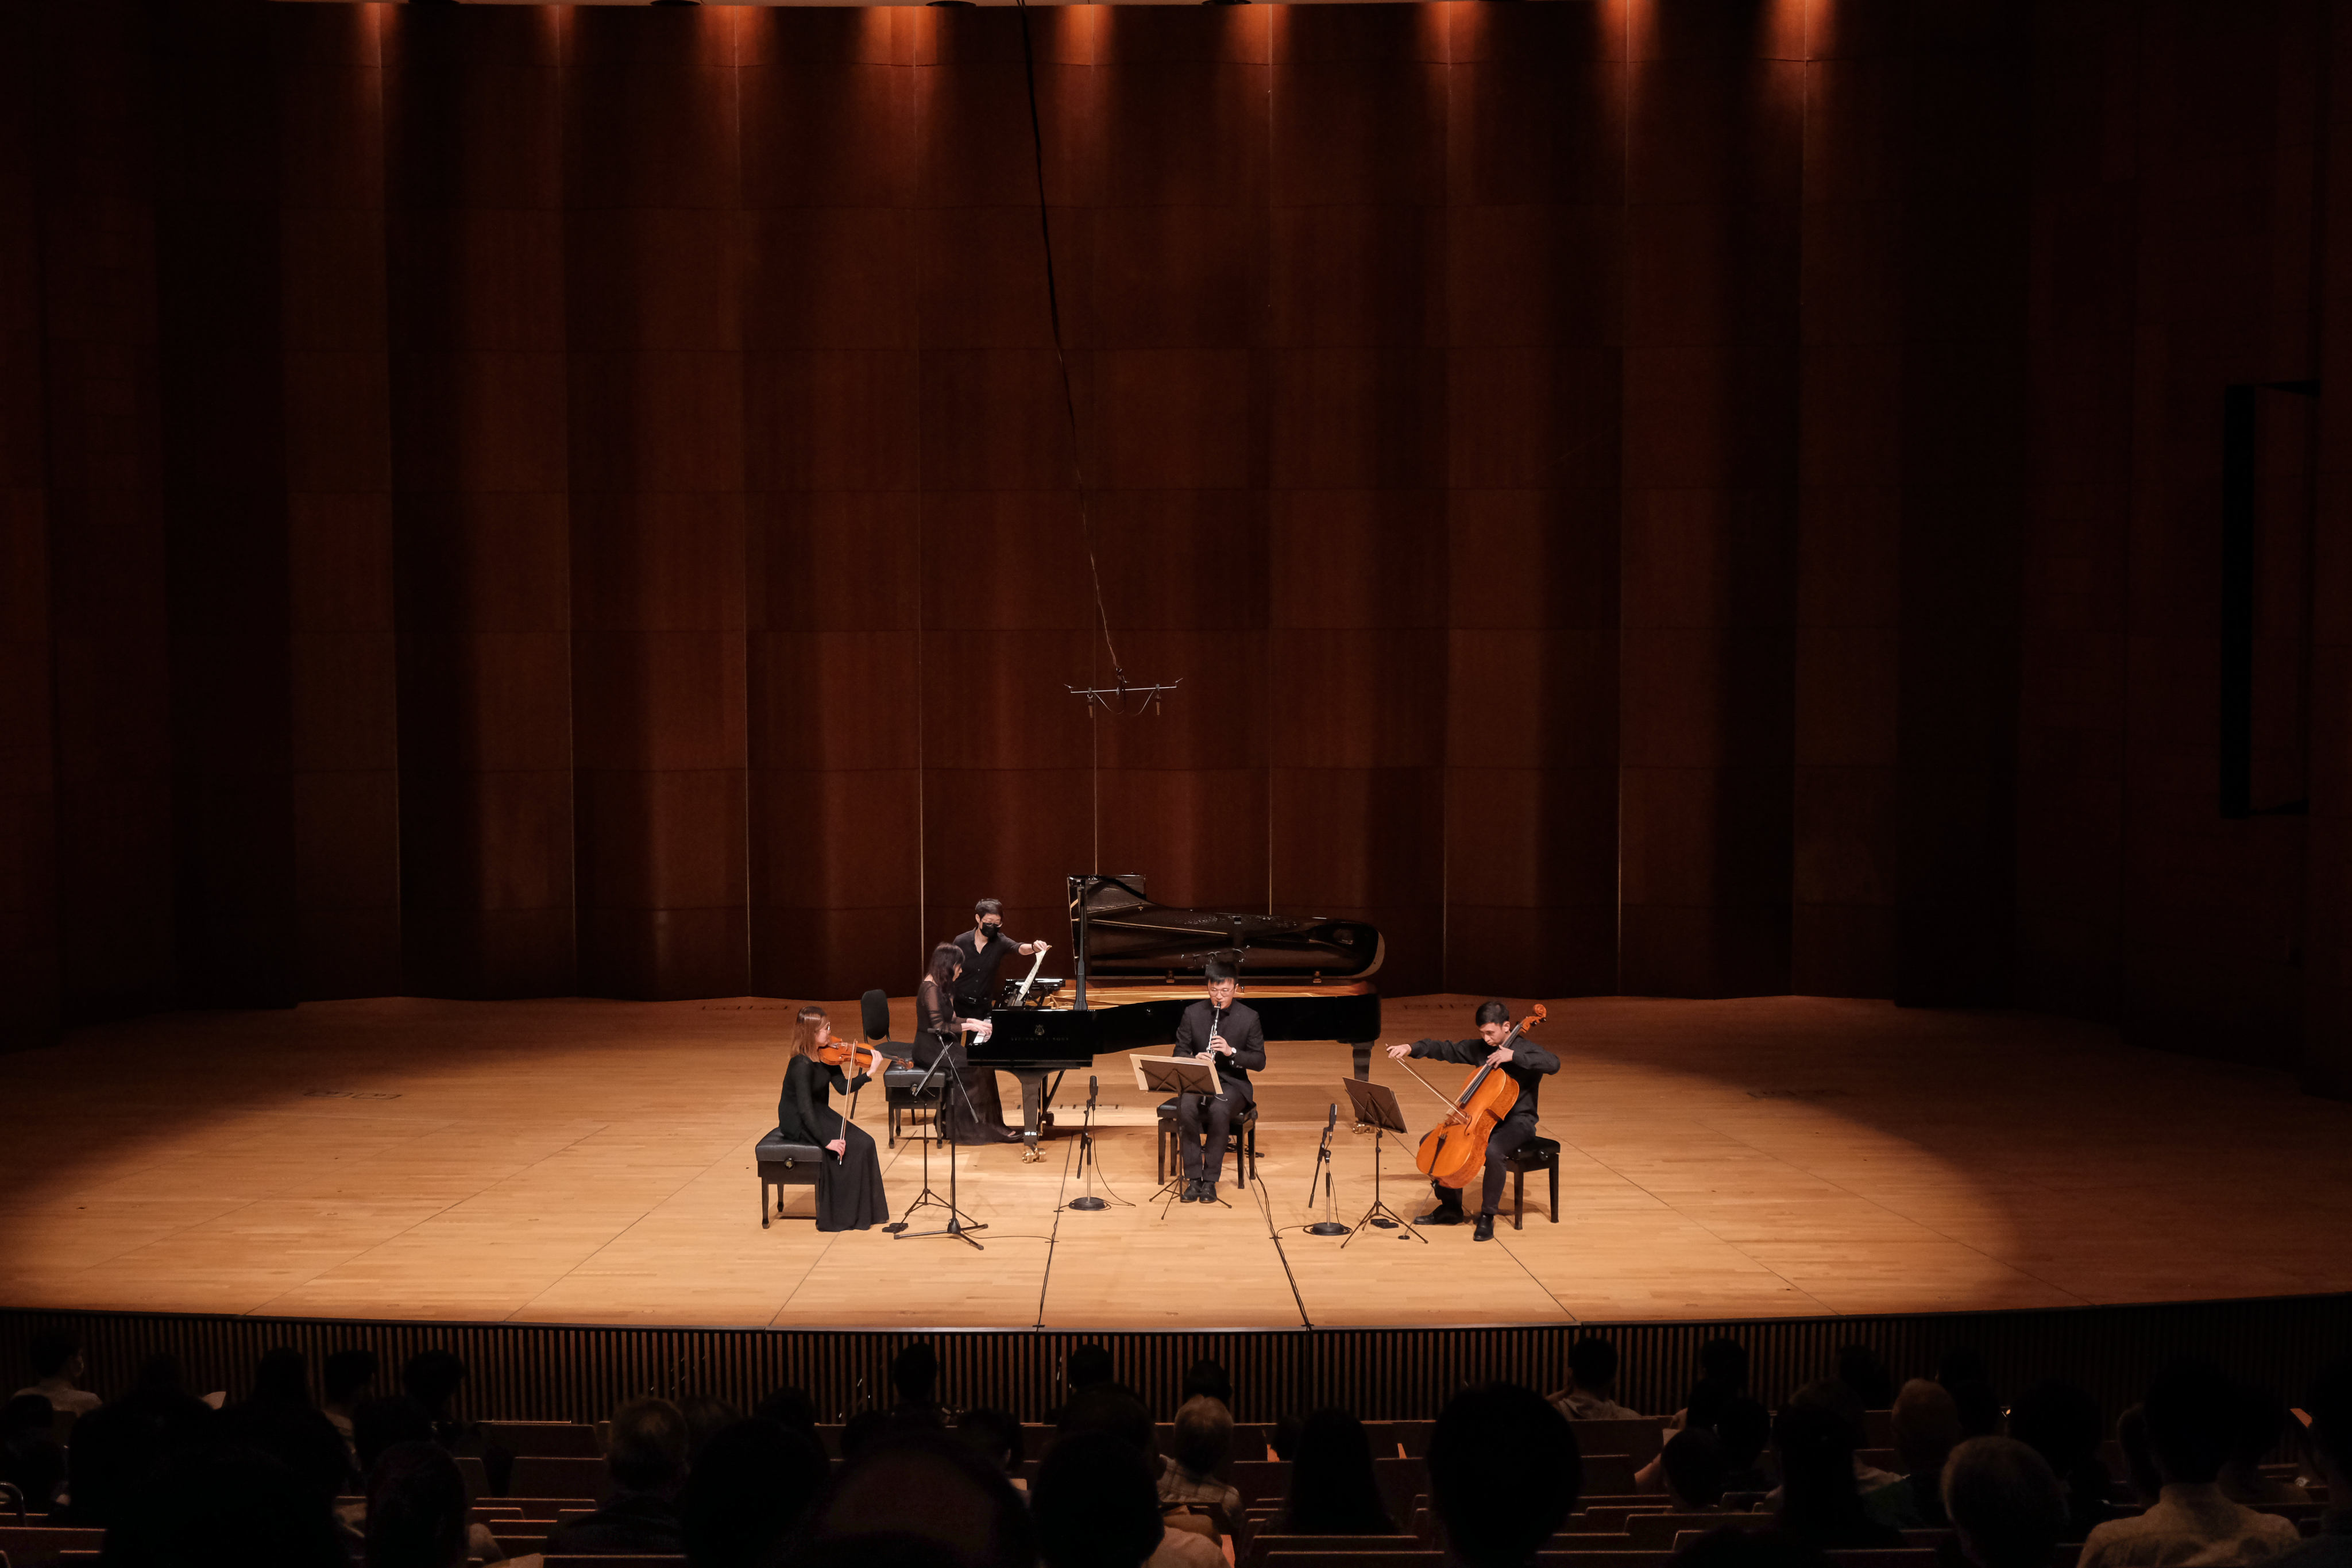 Kitty Cheung (violin), Linus Fung (clarinet), Eric Yip (cello) and Nancy Loo (piano) perform Olivier Messiaen’s Quartet for the End of Time on October 8 at the University of Hong Kong’s Grand Hall, in a concert marking the 40th anniversary of the university’s music department.